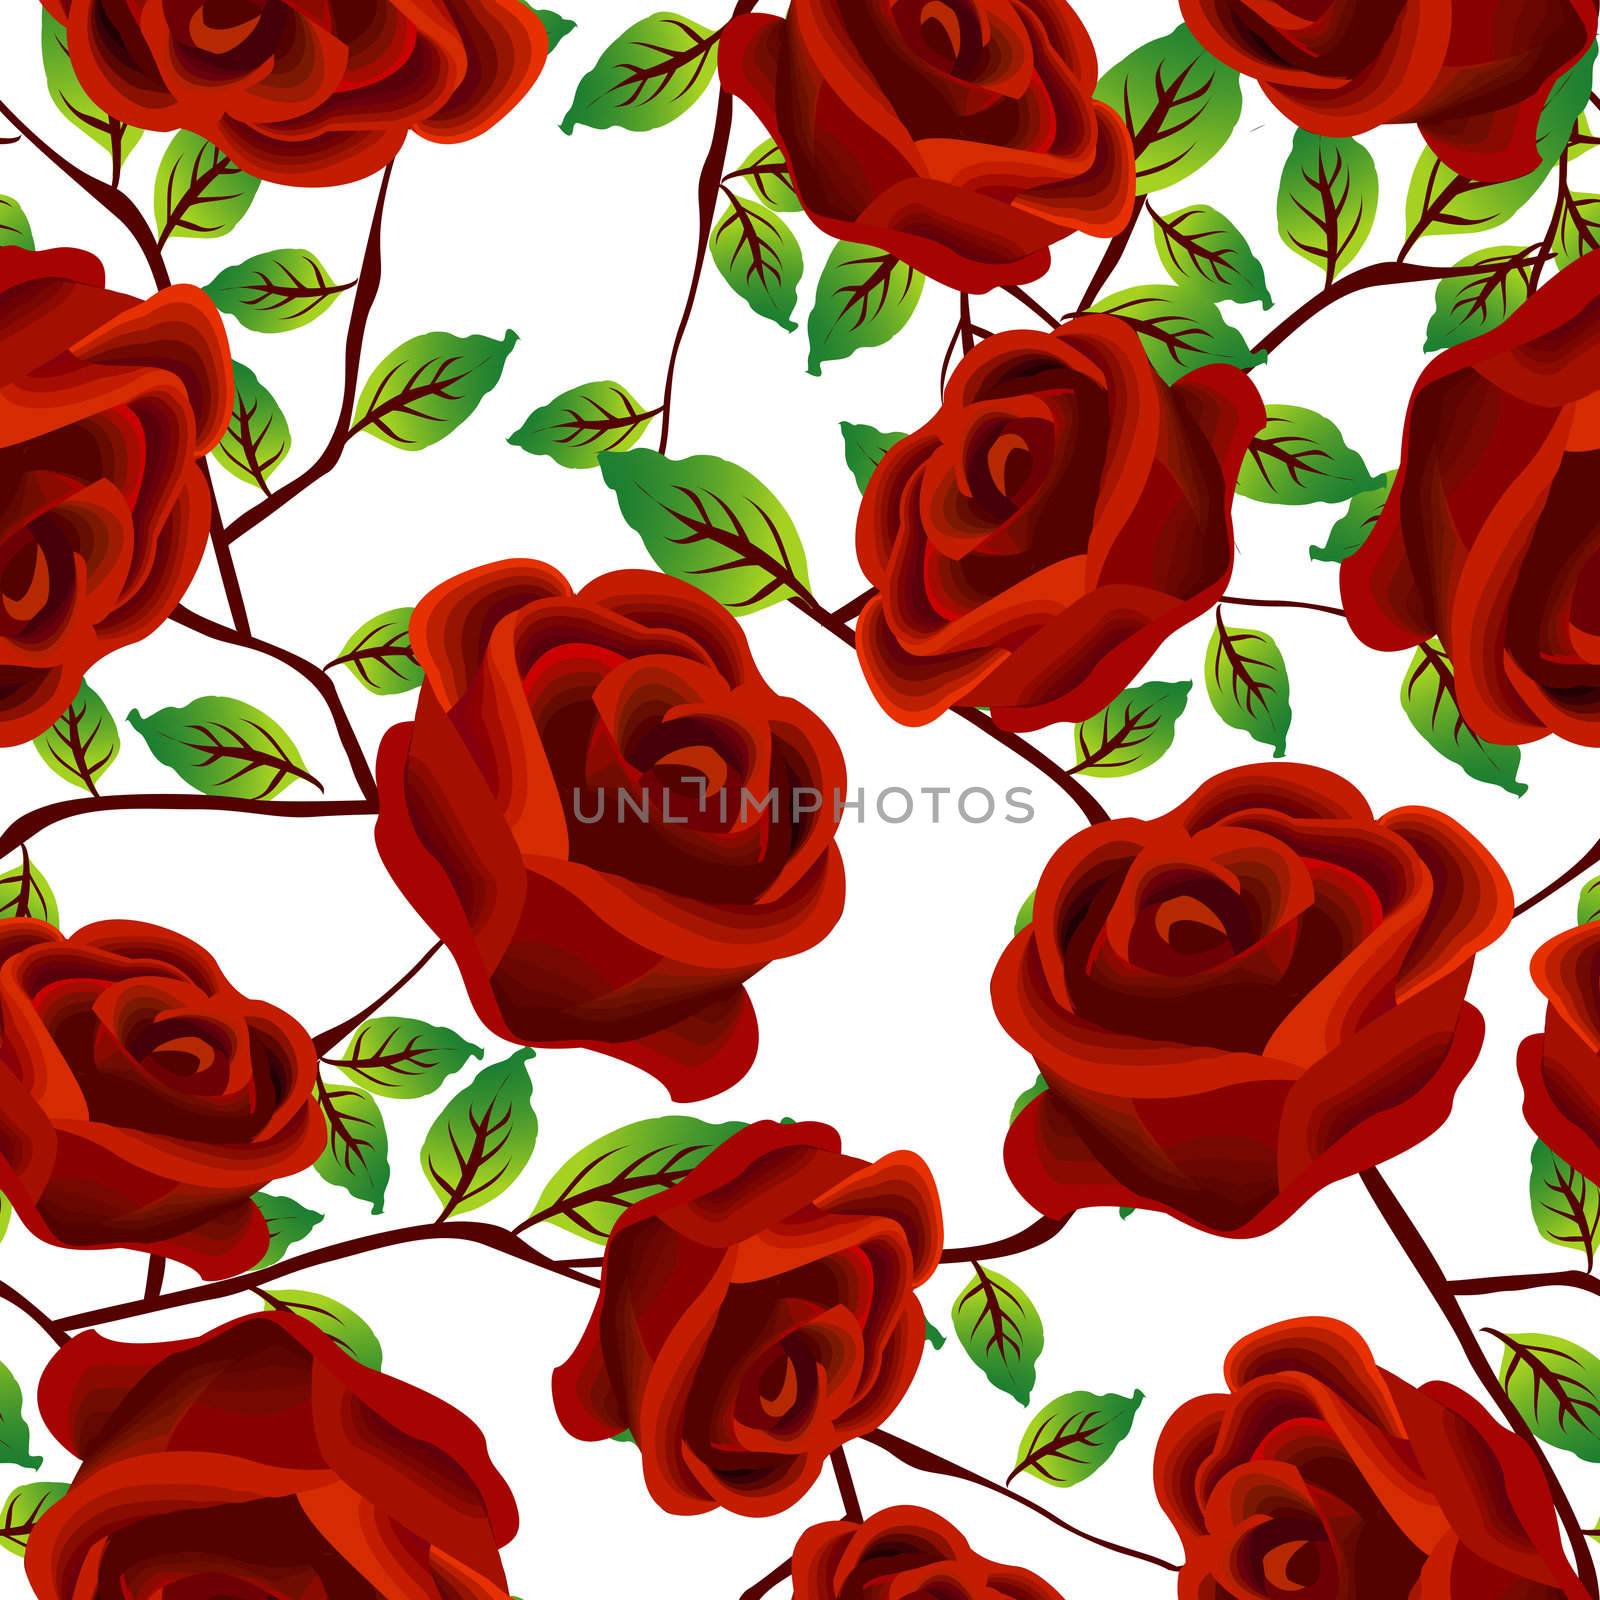 Seamless background design with stylized red roses isolated over white background